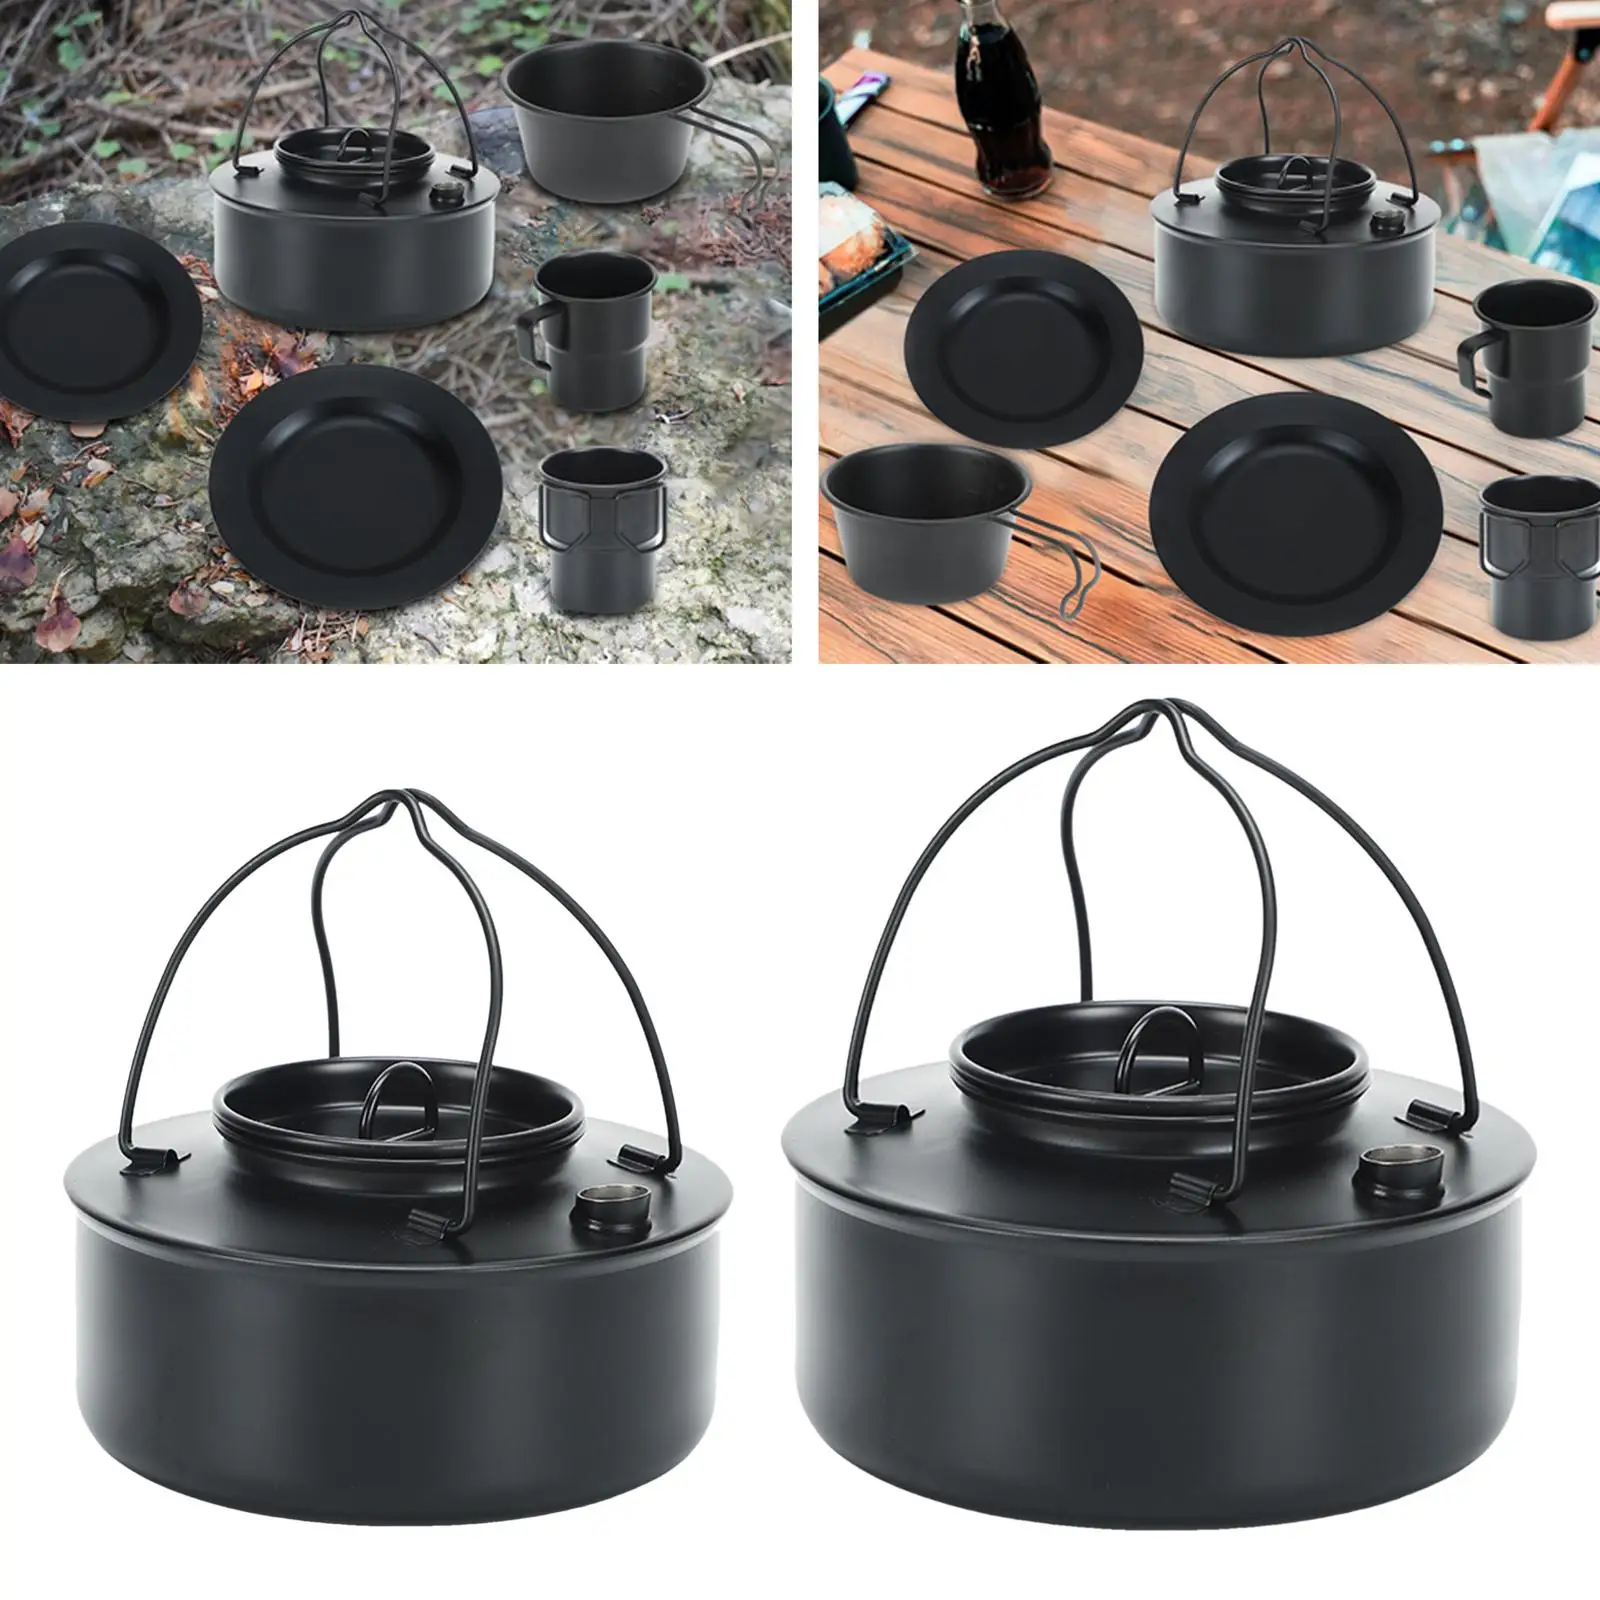 Portable Outdoor Tea Coffee Pot Teapot Campfire Kitchenware Cookware with Handle